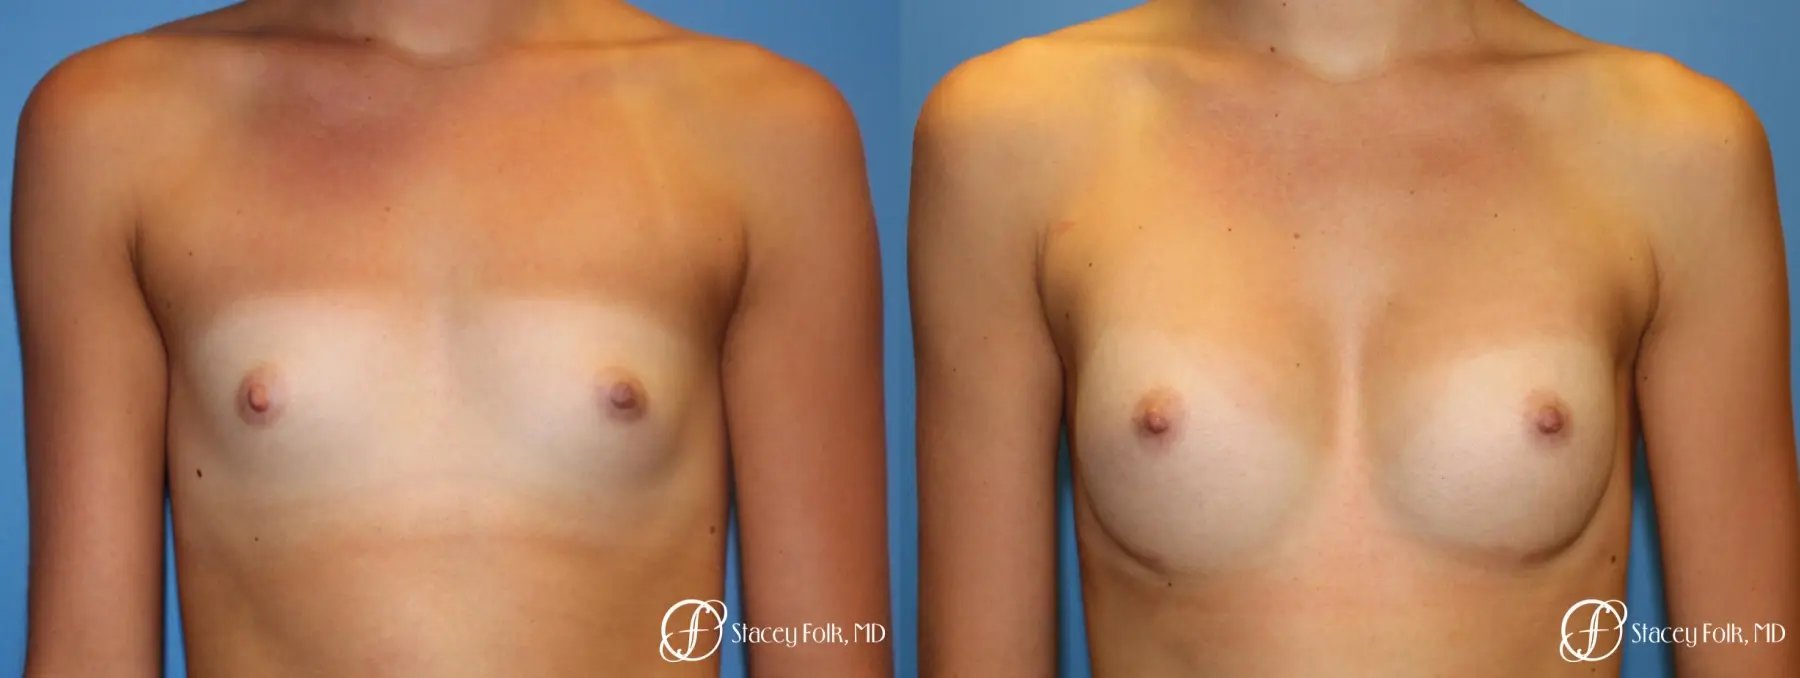 Denver Breast Augmentation with Sientra Breast Implants 9094 - Before and After